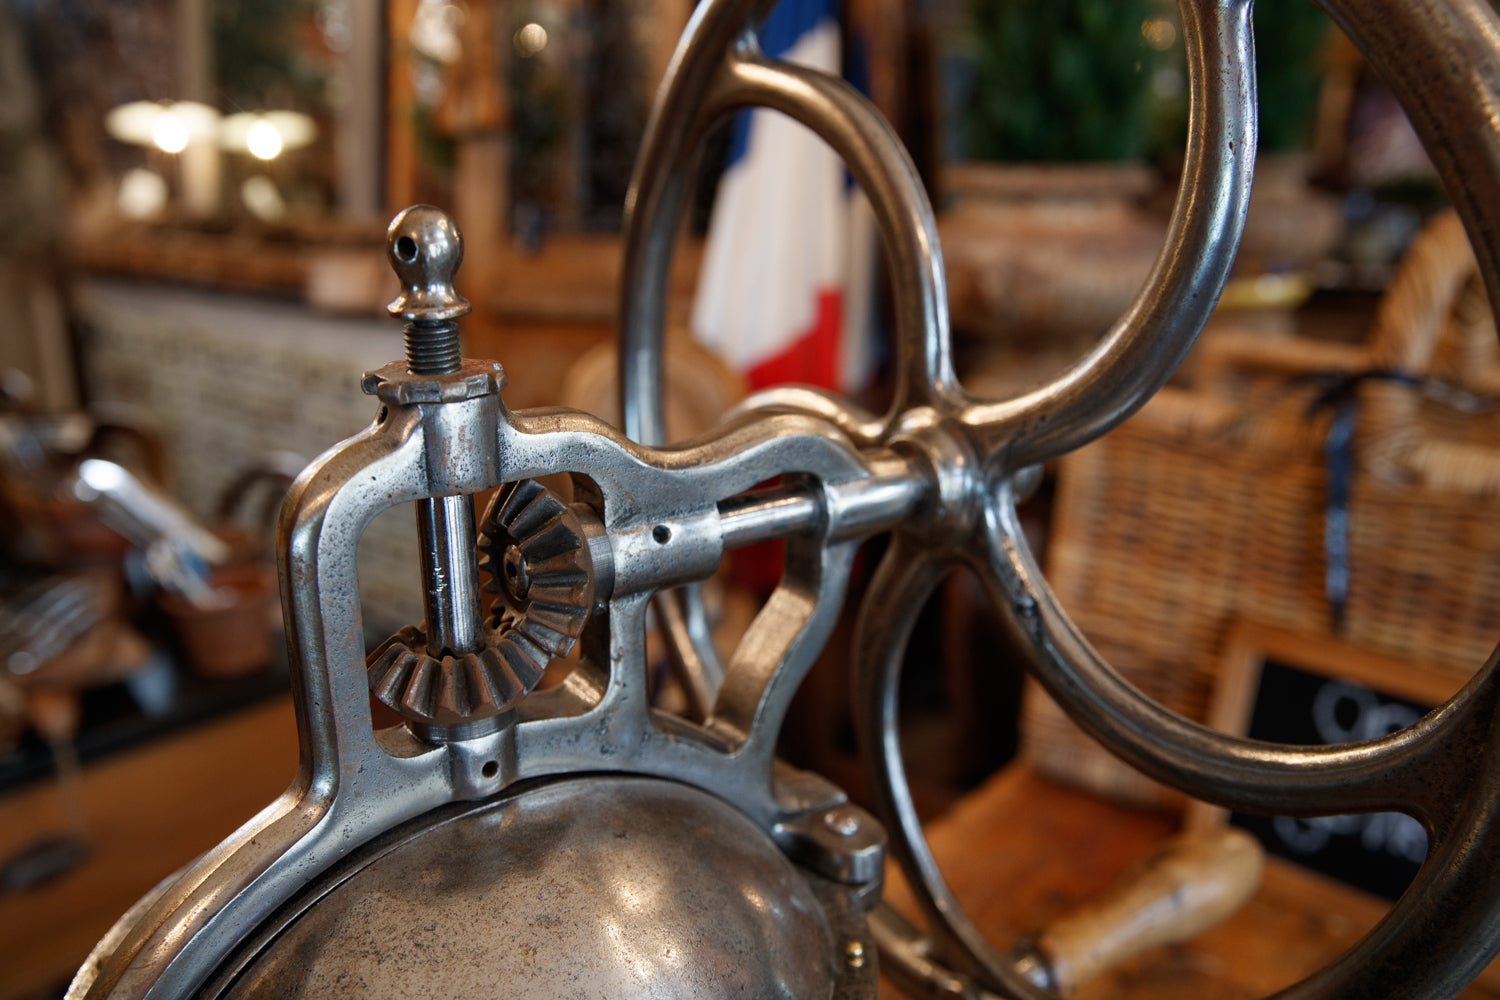 French Cafe Industrial Peugeot Coffee Grinder